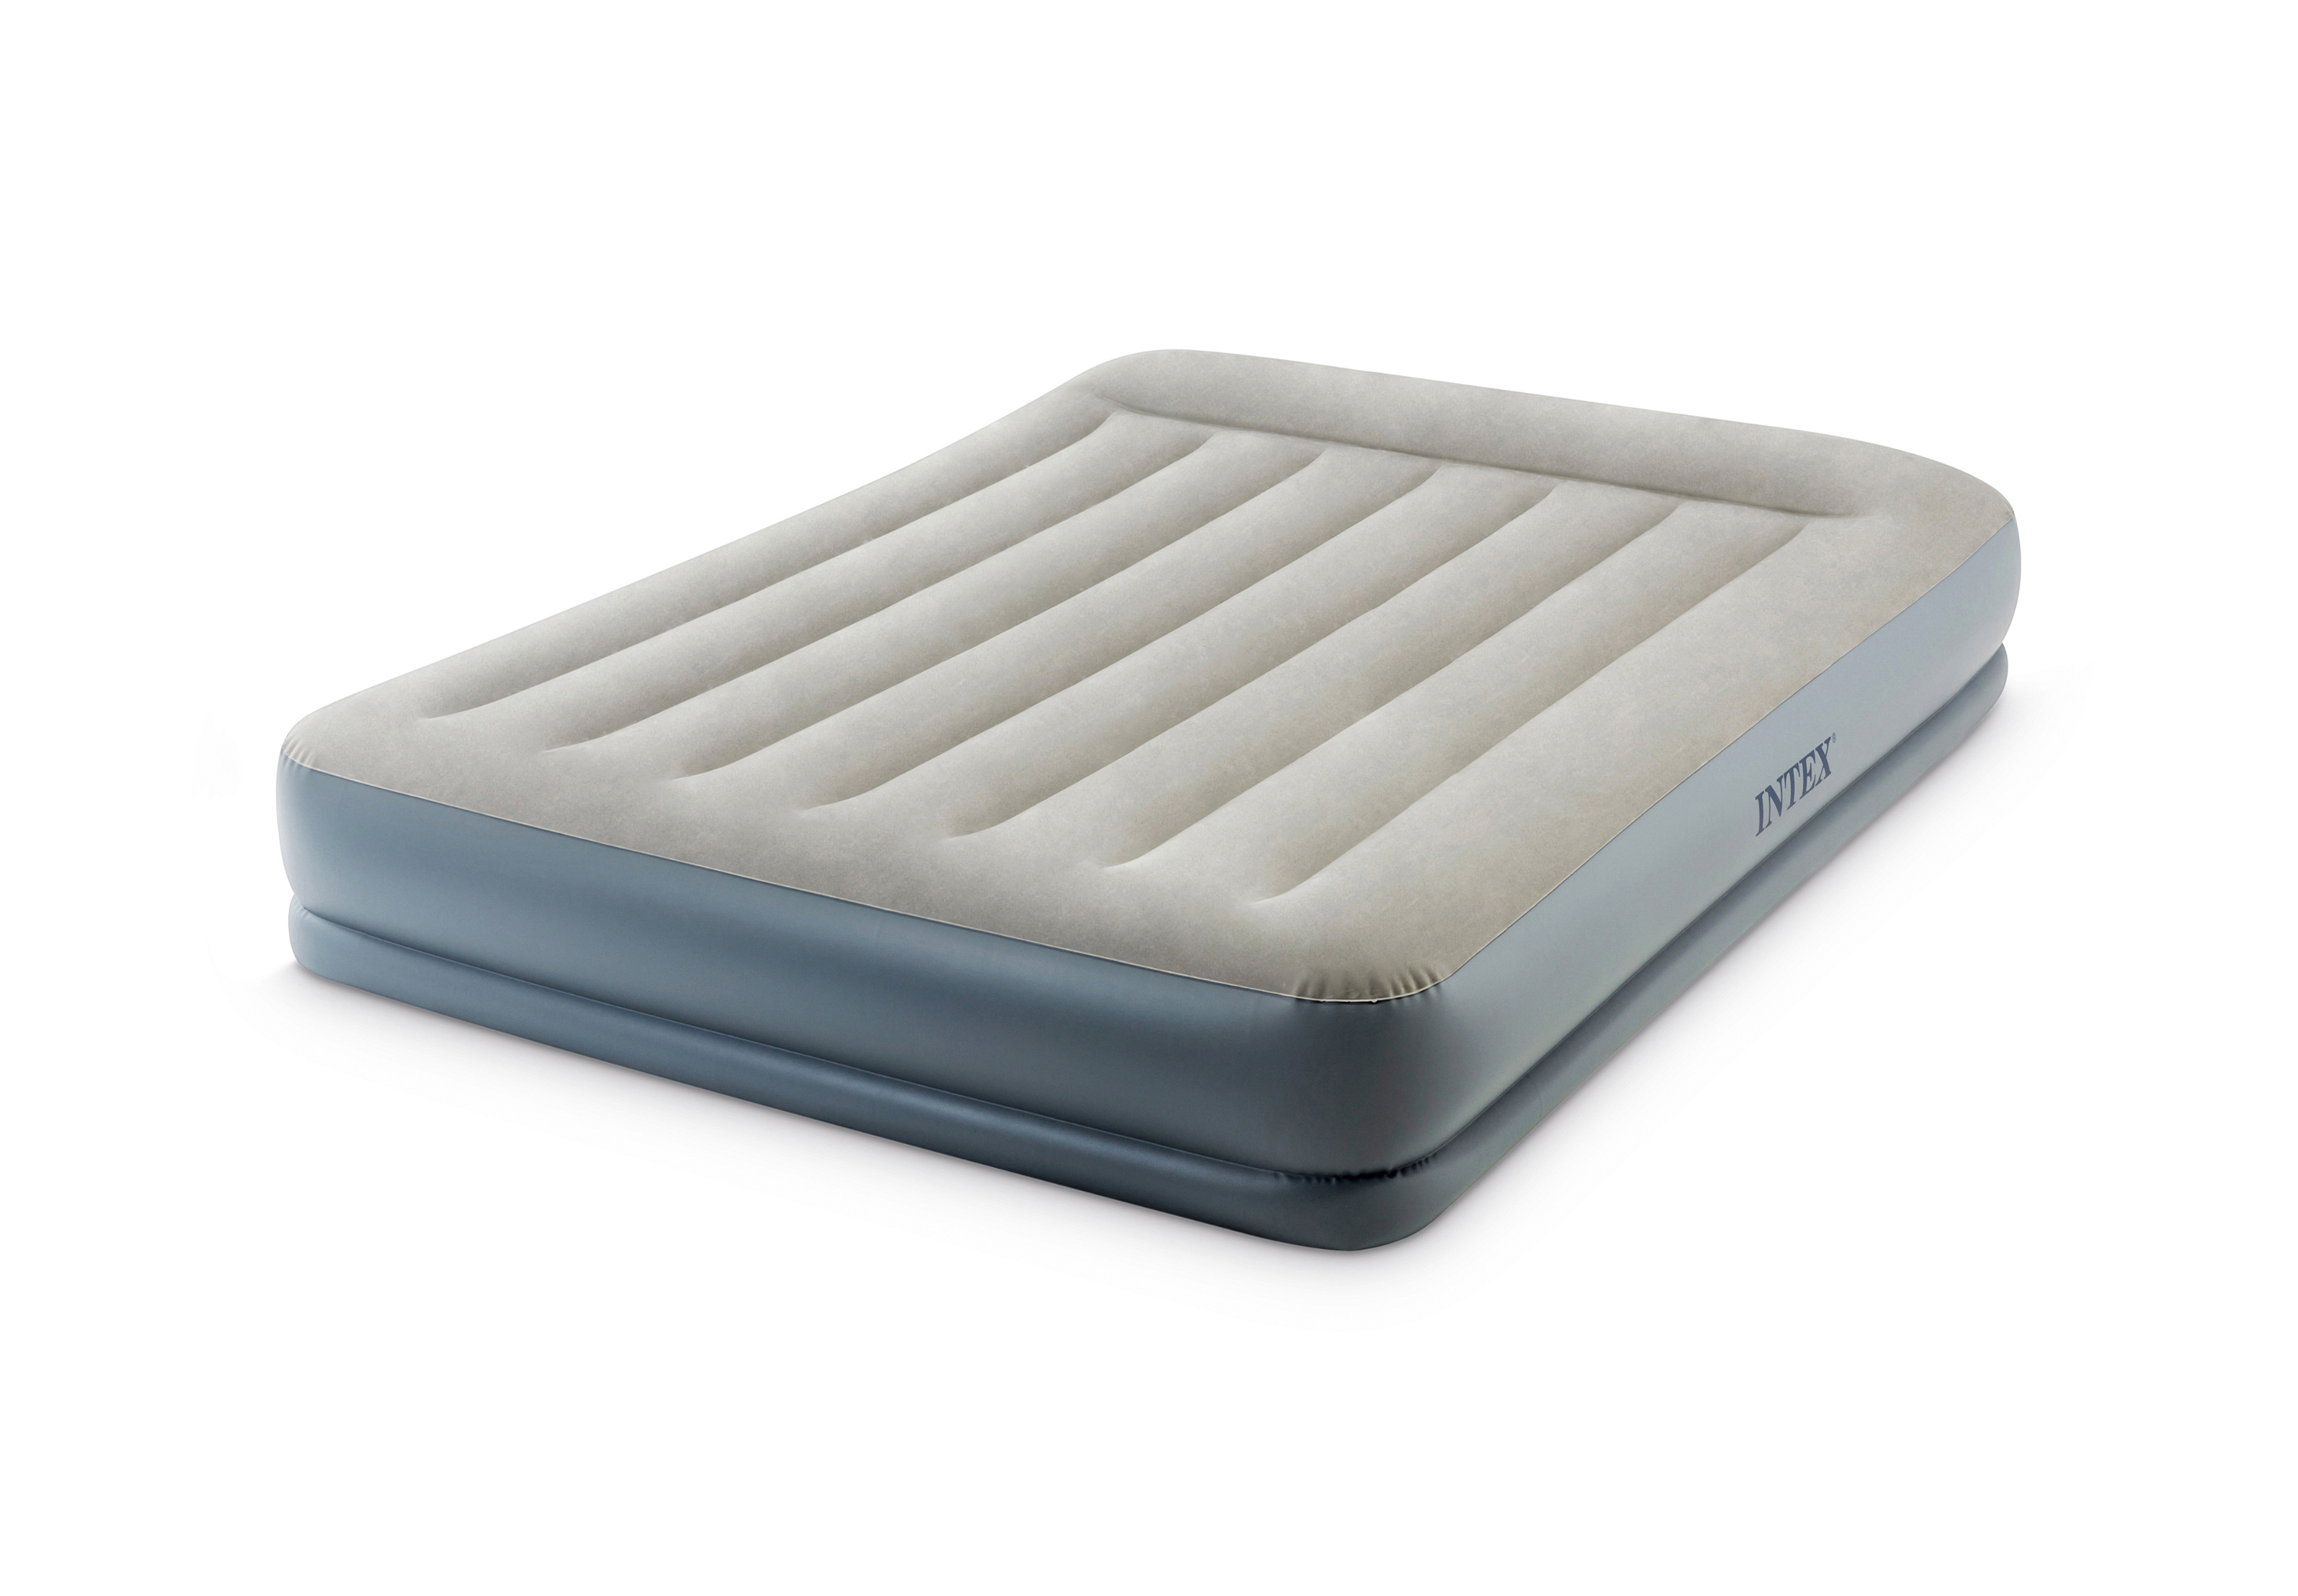 Intex Dura-Beam 12 inch Pillow Rest Mid-Rise Air Bed Mattress with Built-in Pump, Queen - image 1 of 13